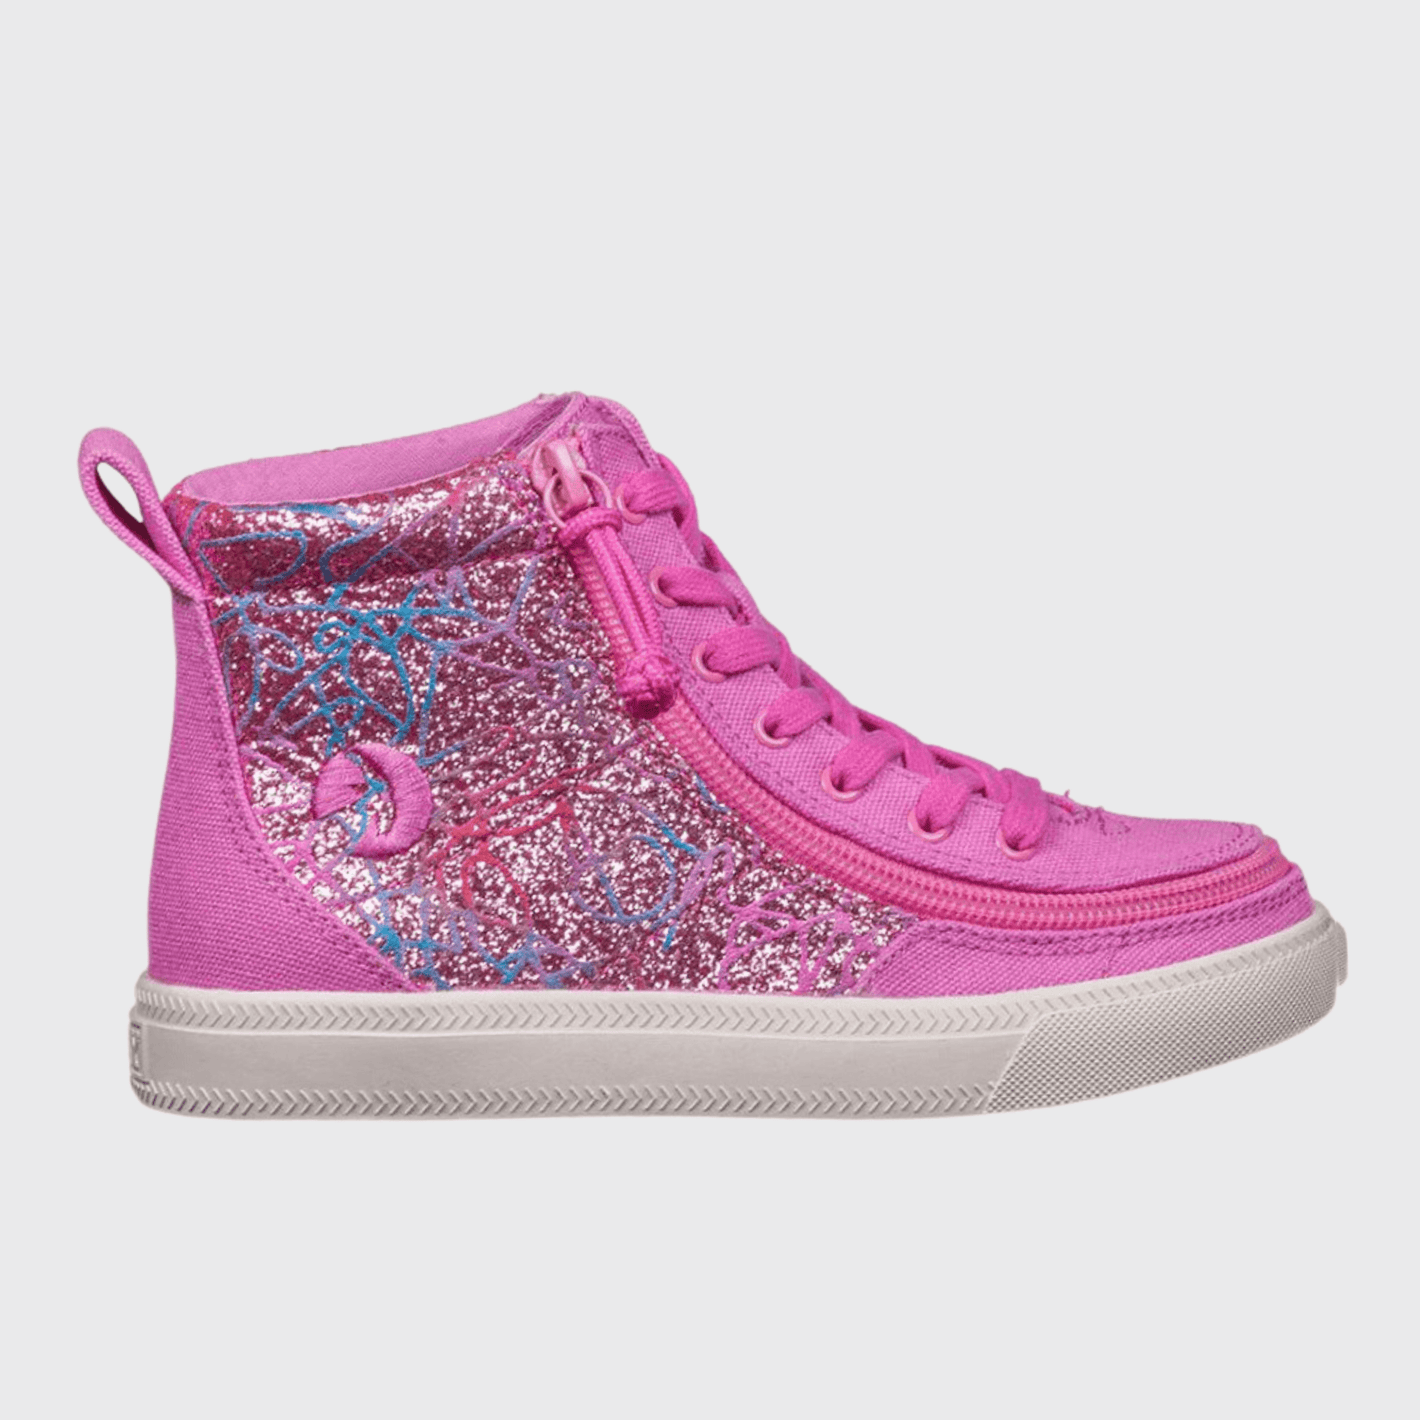 Billy Footwear High Tops Billy Footwear - Pink Print Canvas BILLY Classic Lace High